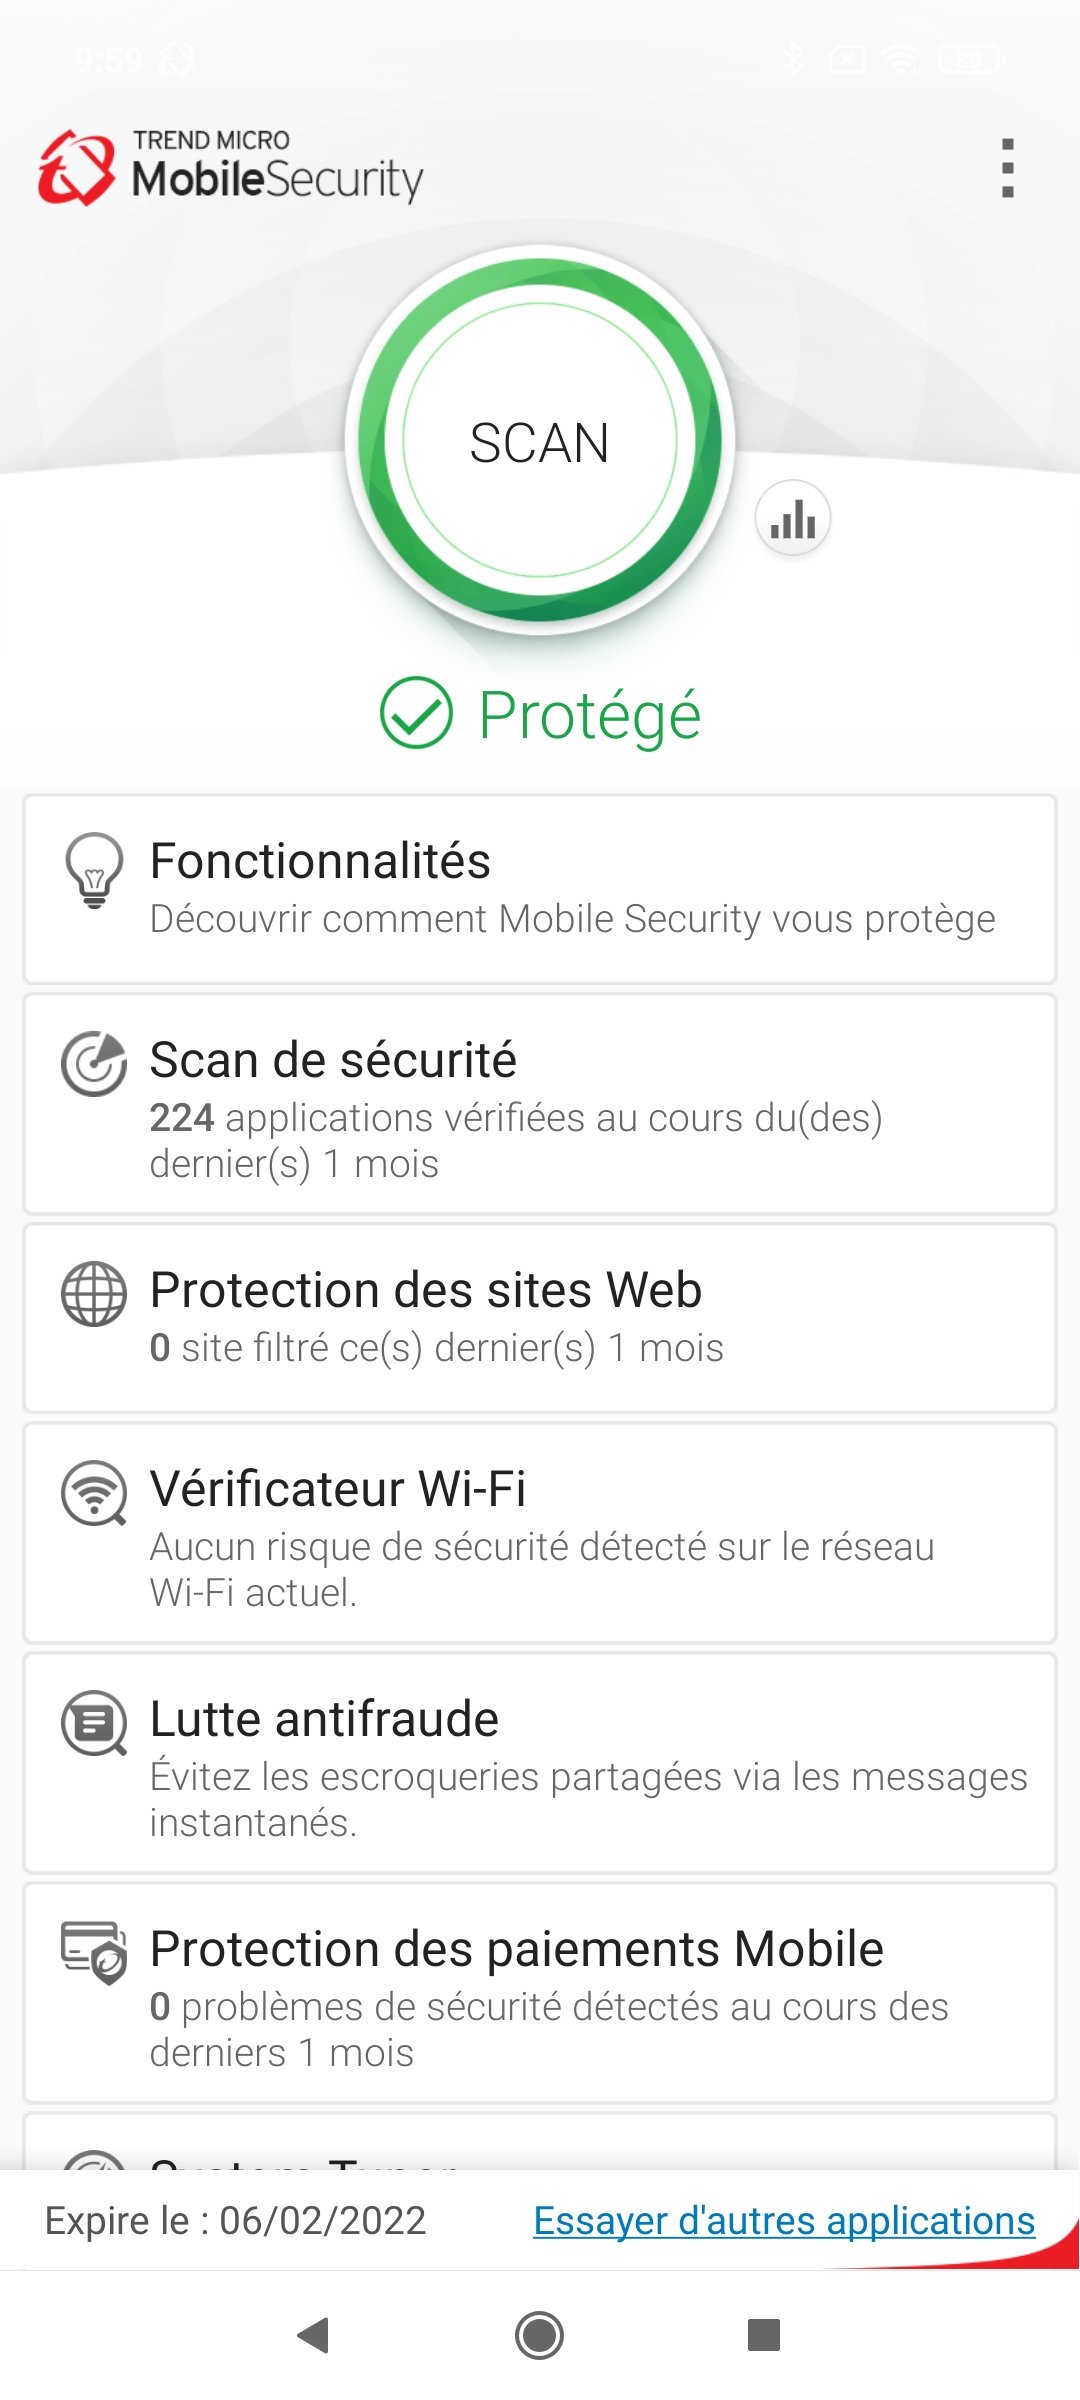 Trend Micro Mobile Security - Scan